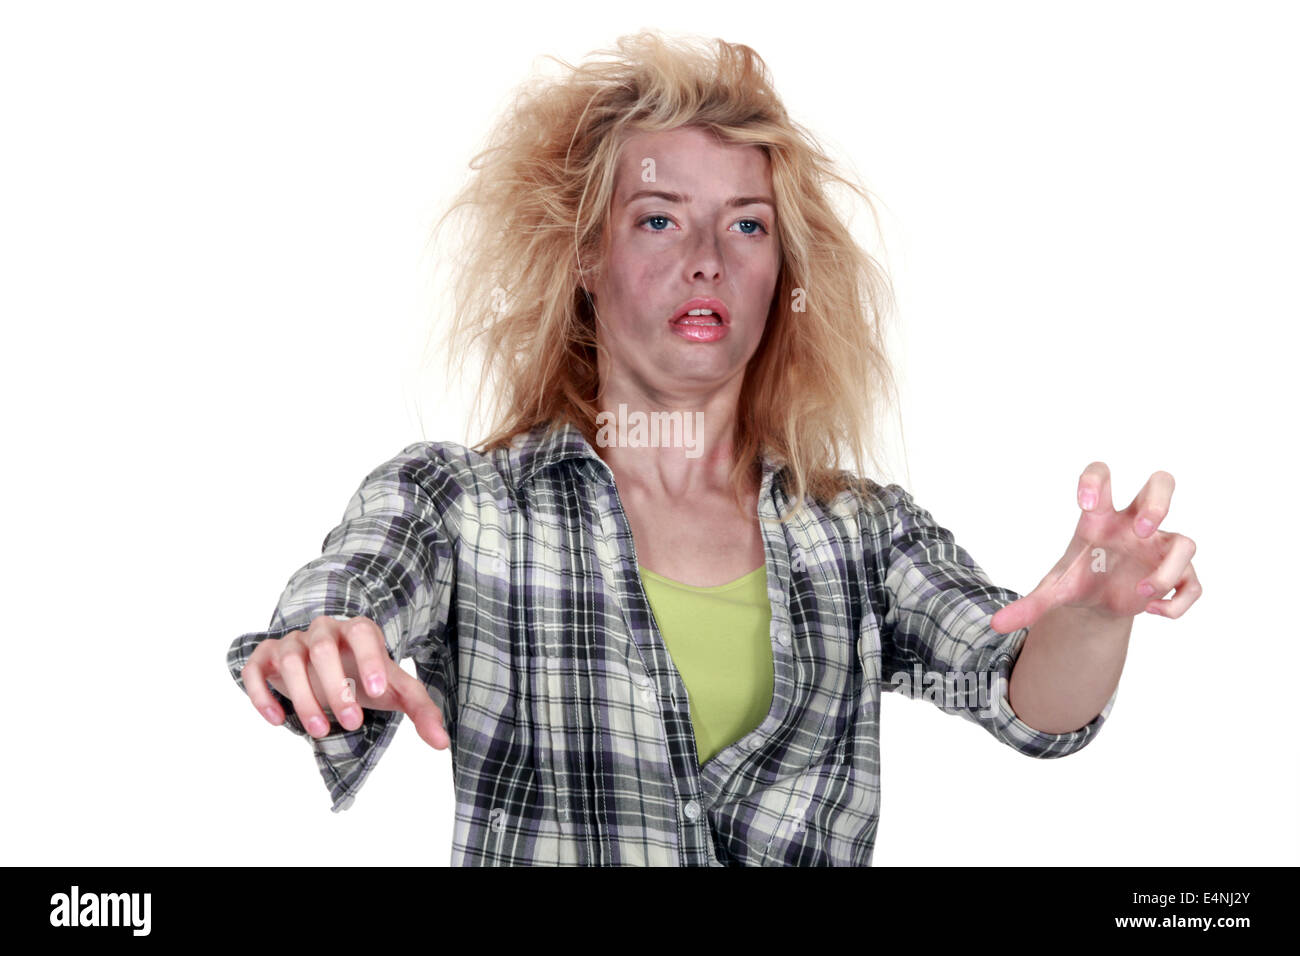 woman after electrical shock Stock Photo